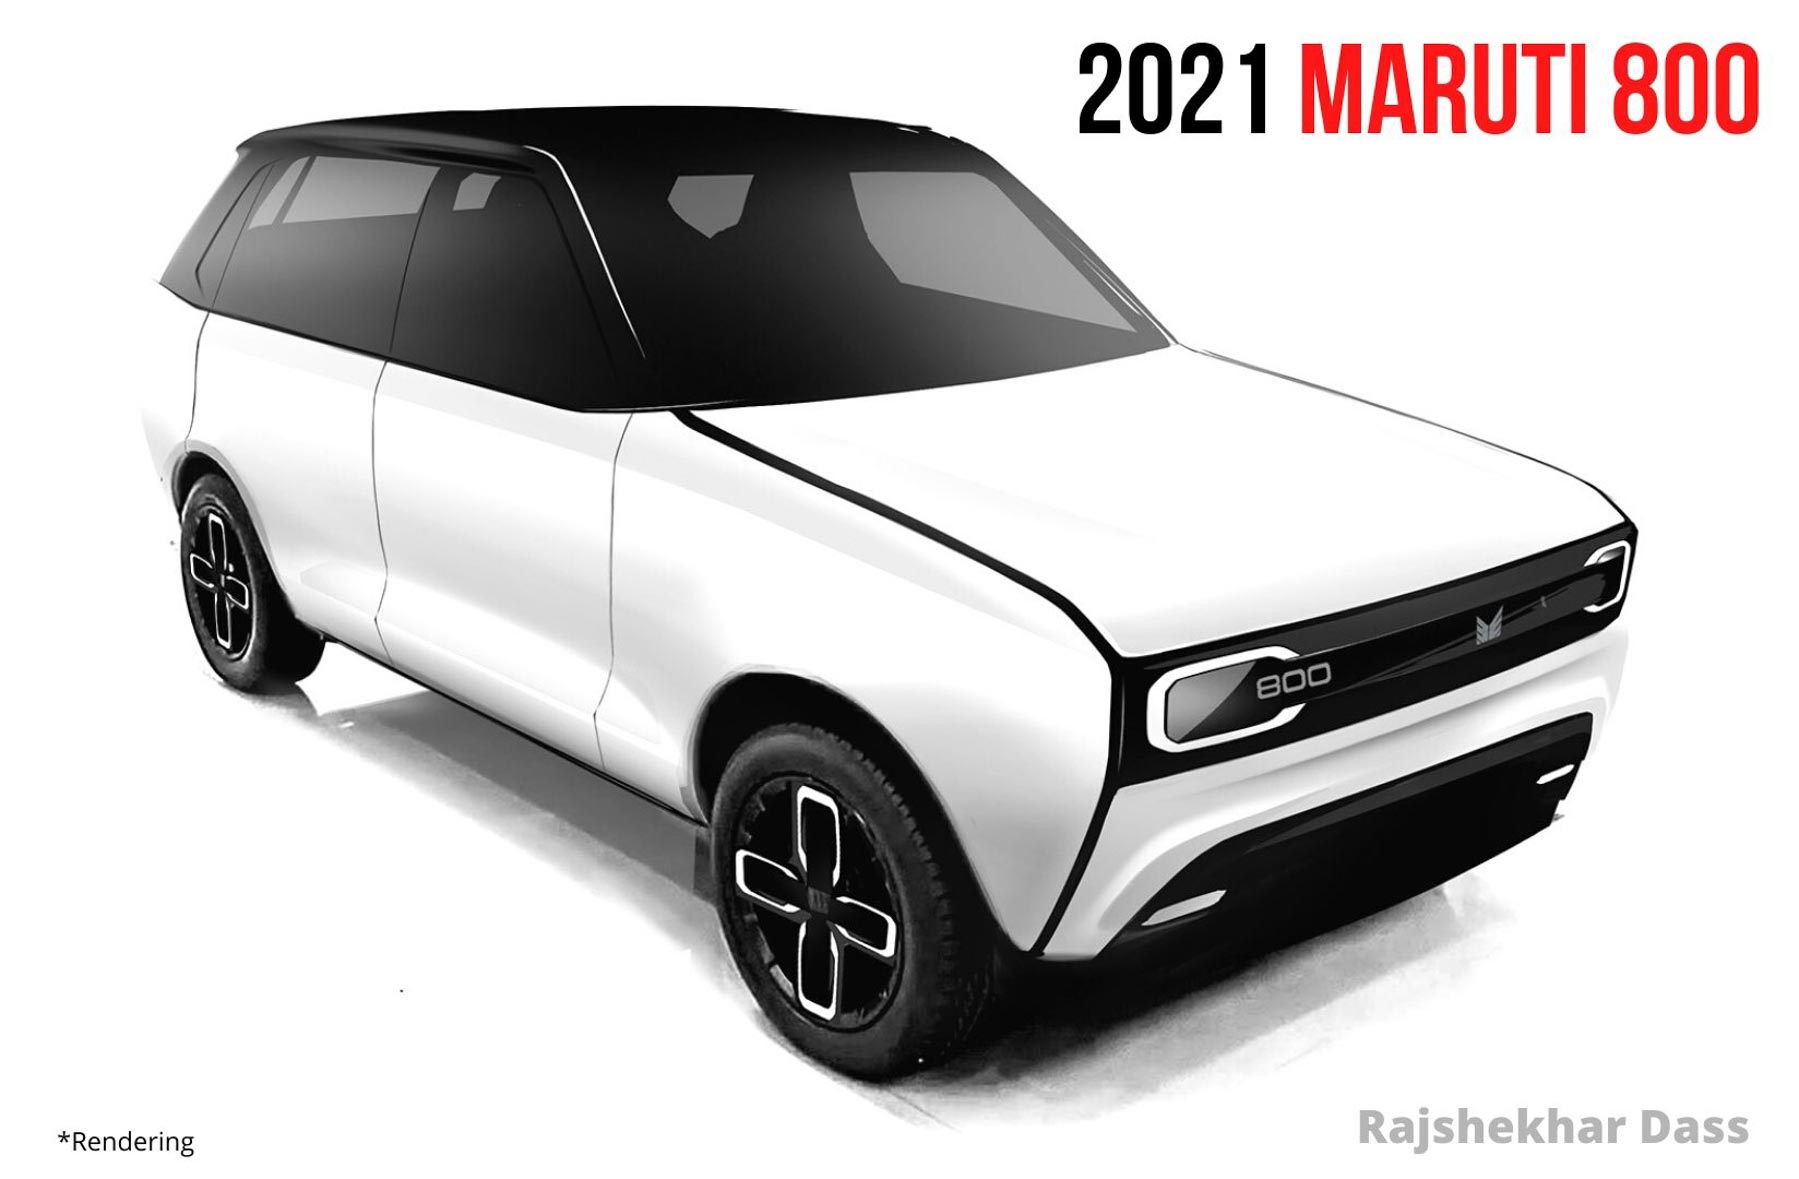 New Maruti 800cc Car Coming Next Year 5 Things To Know